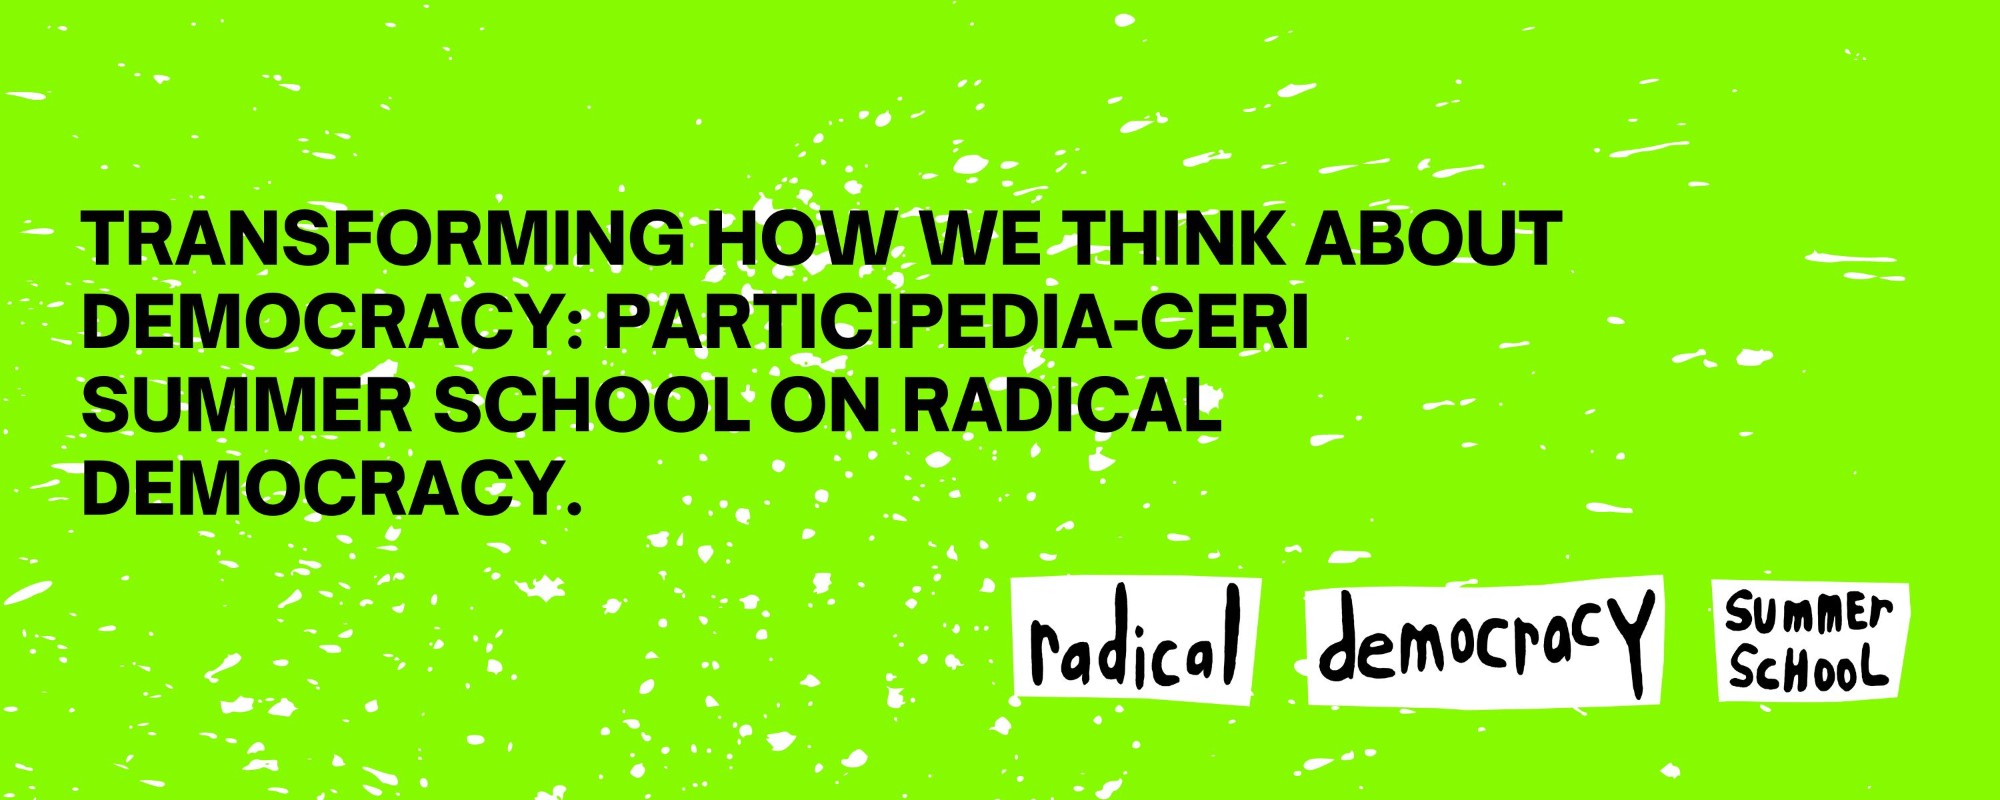 Transforming How We Think About Democracy: Participedia-CERi Summer School on Radical Democracy.